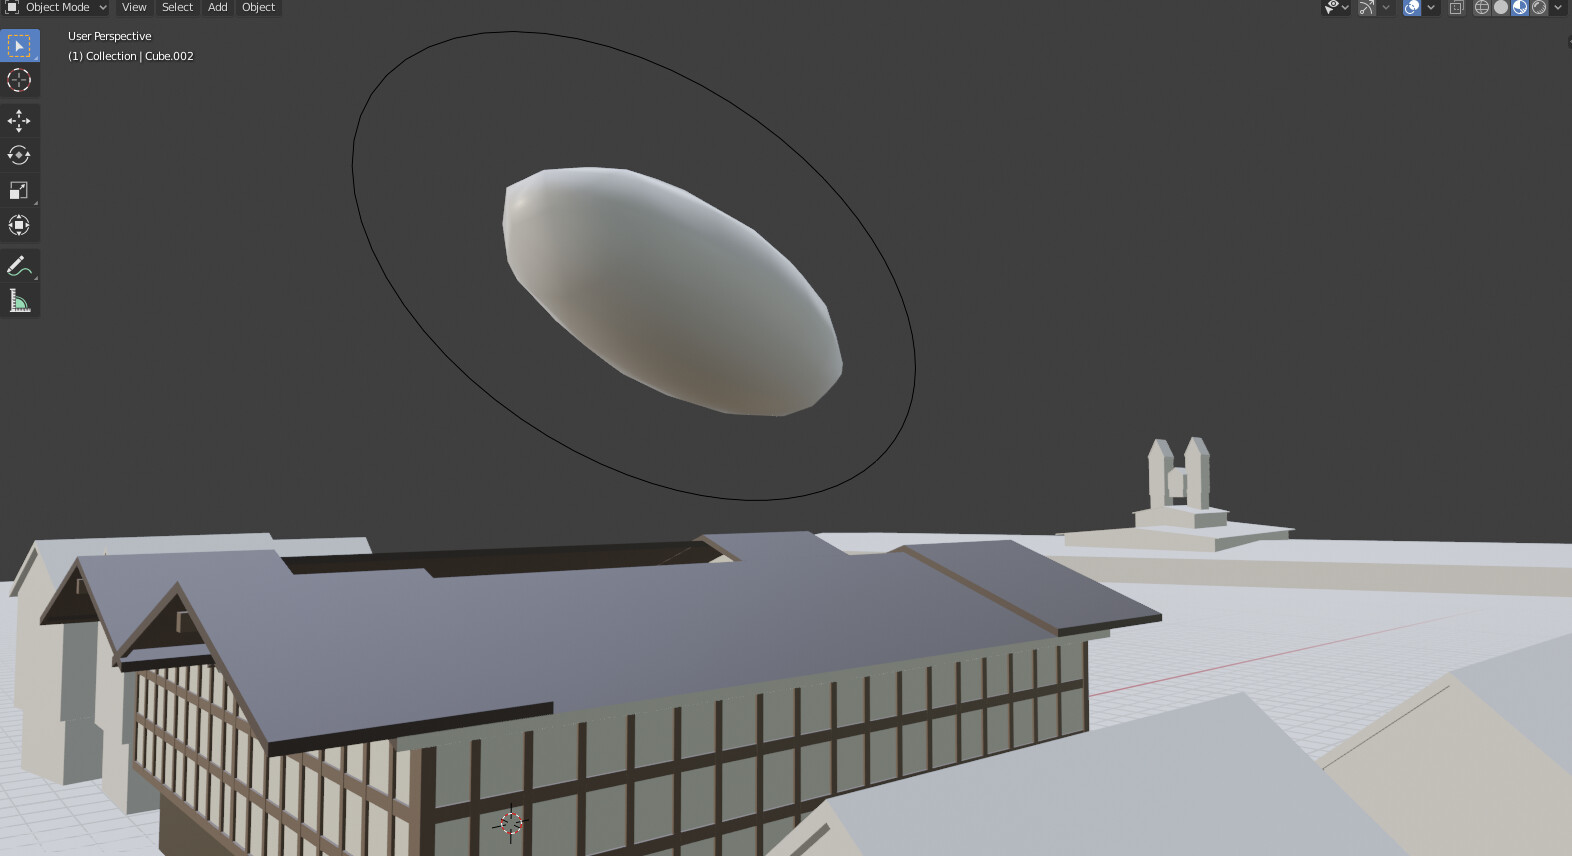 Decided upon angle in Blender